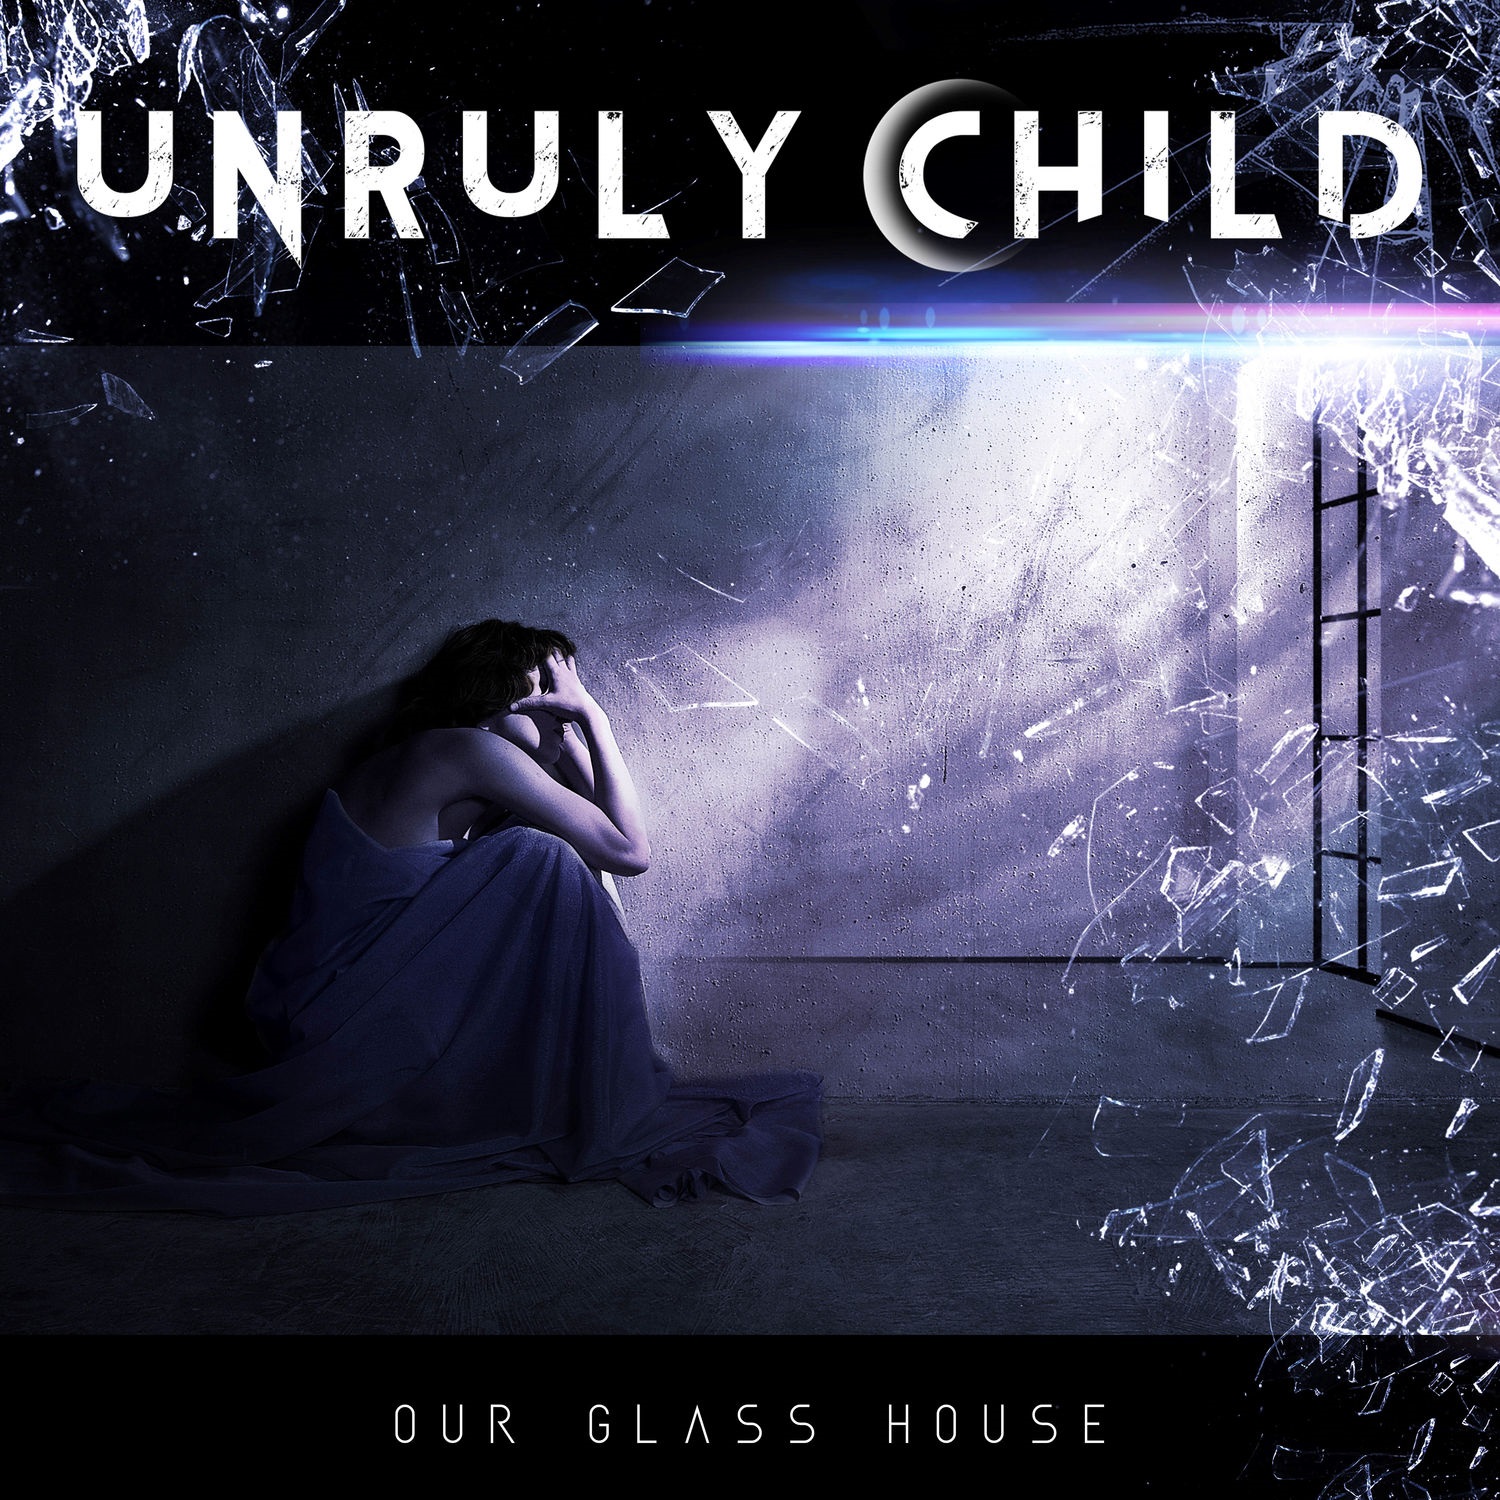 Unruly Child – Our Glass House (2020) [FLAC 24bit/44,1kHz]